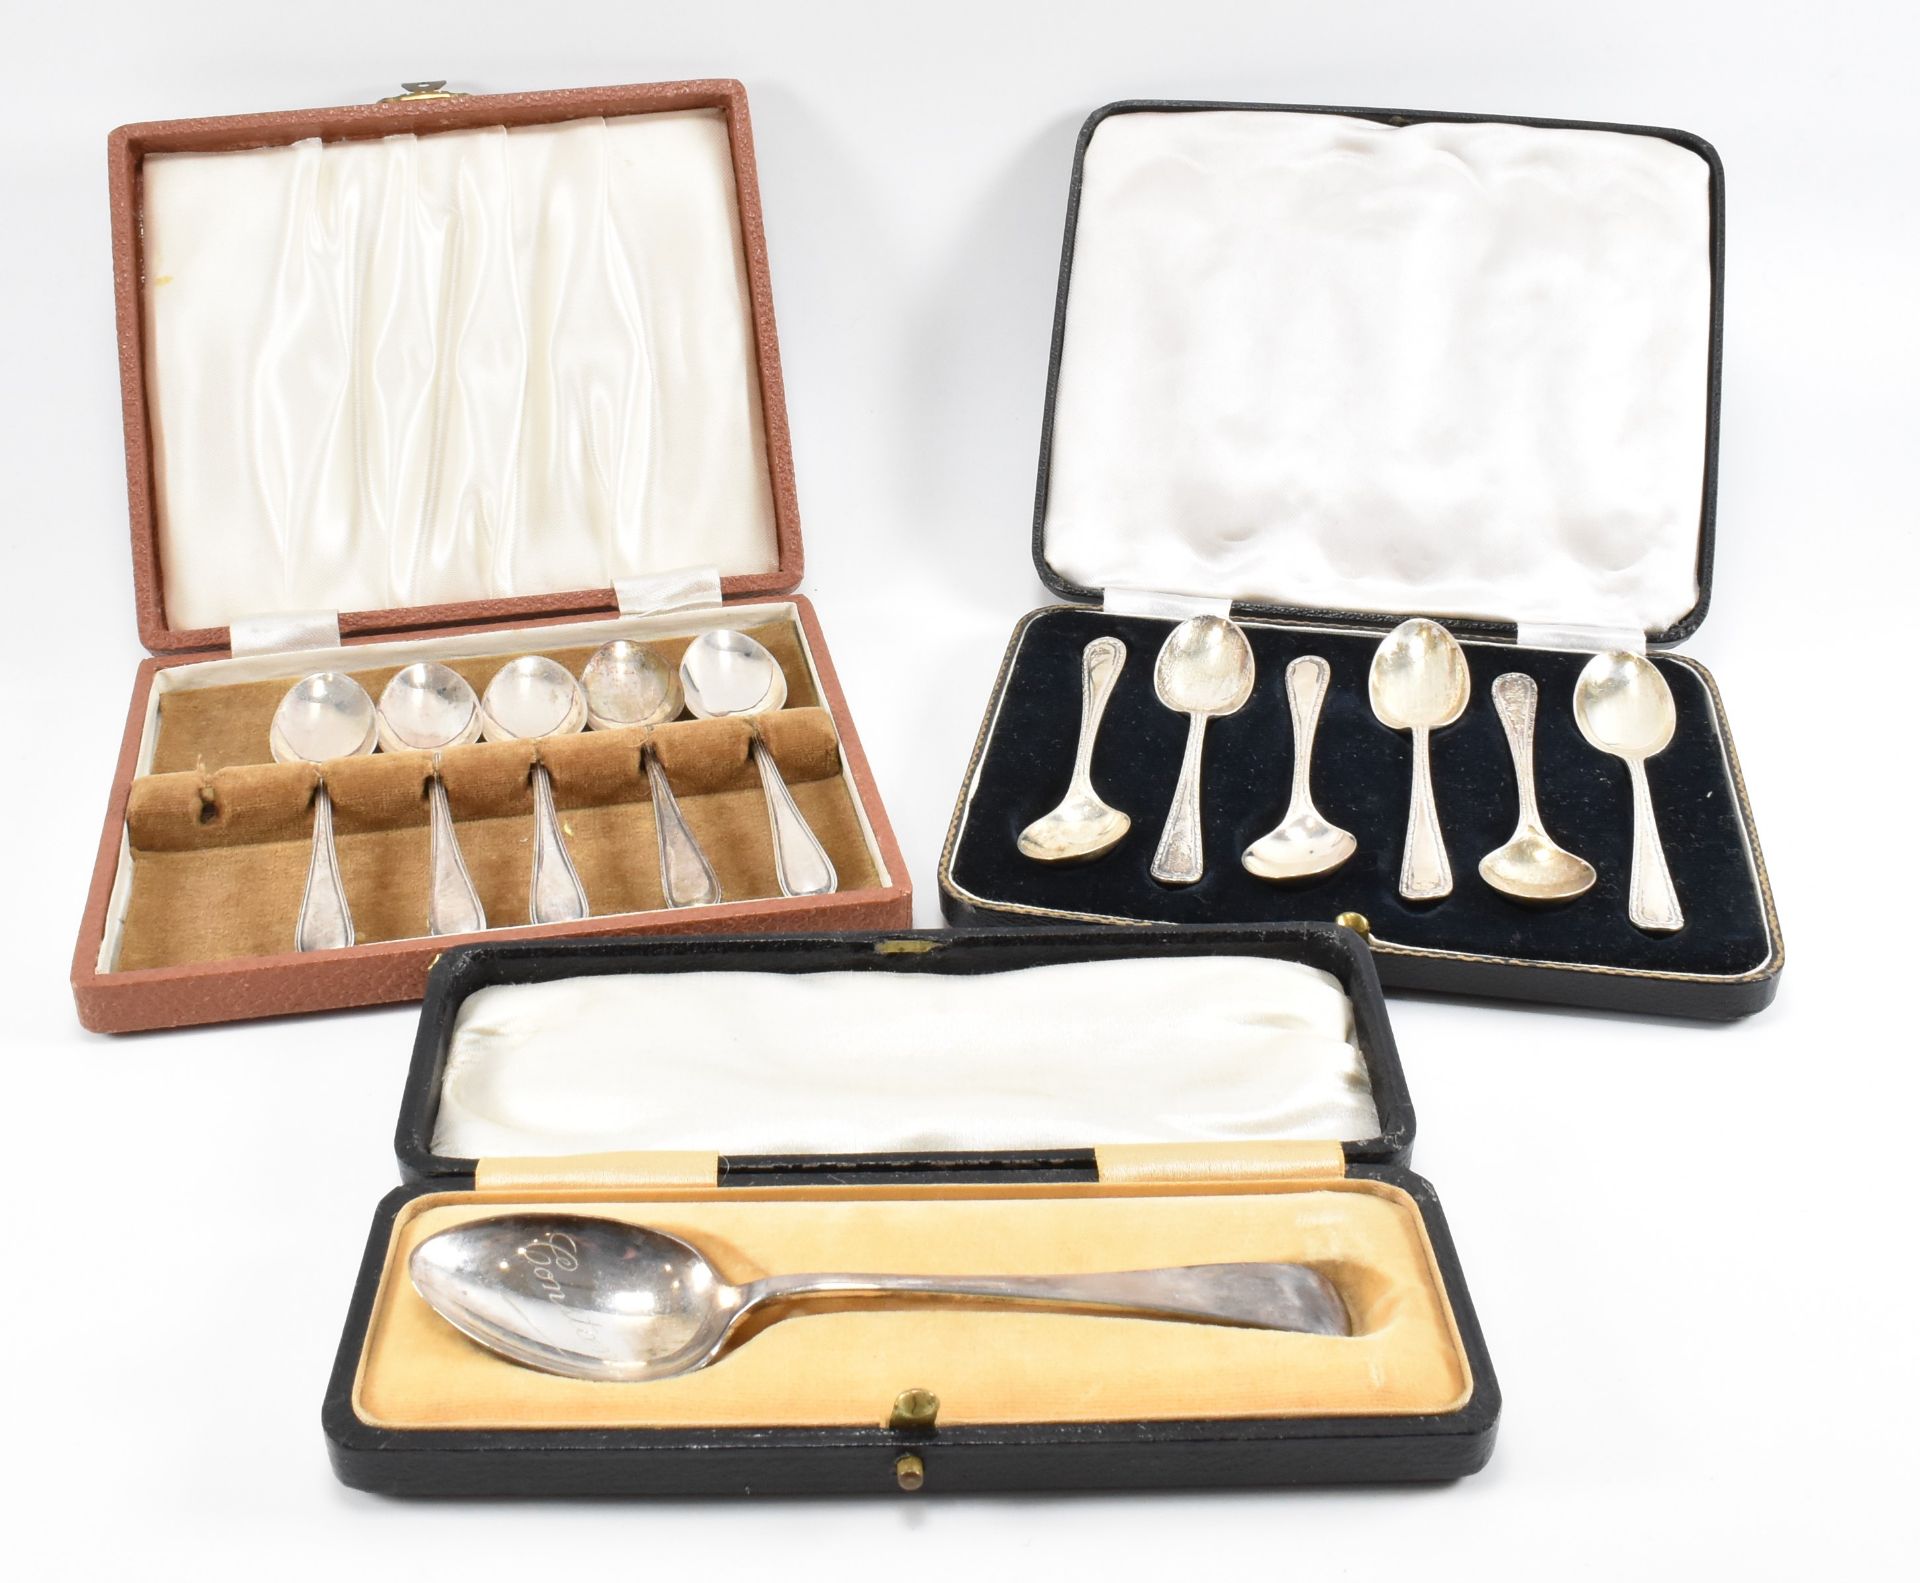 GROUP OF 20TH CENTURY SILVER HALLMARKED SPOONS